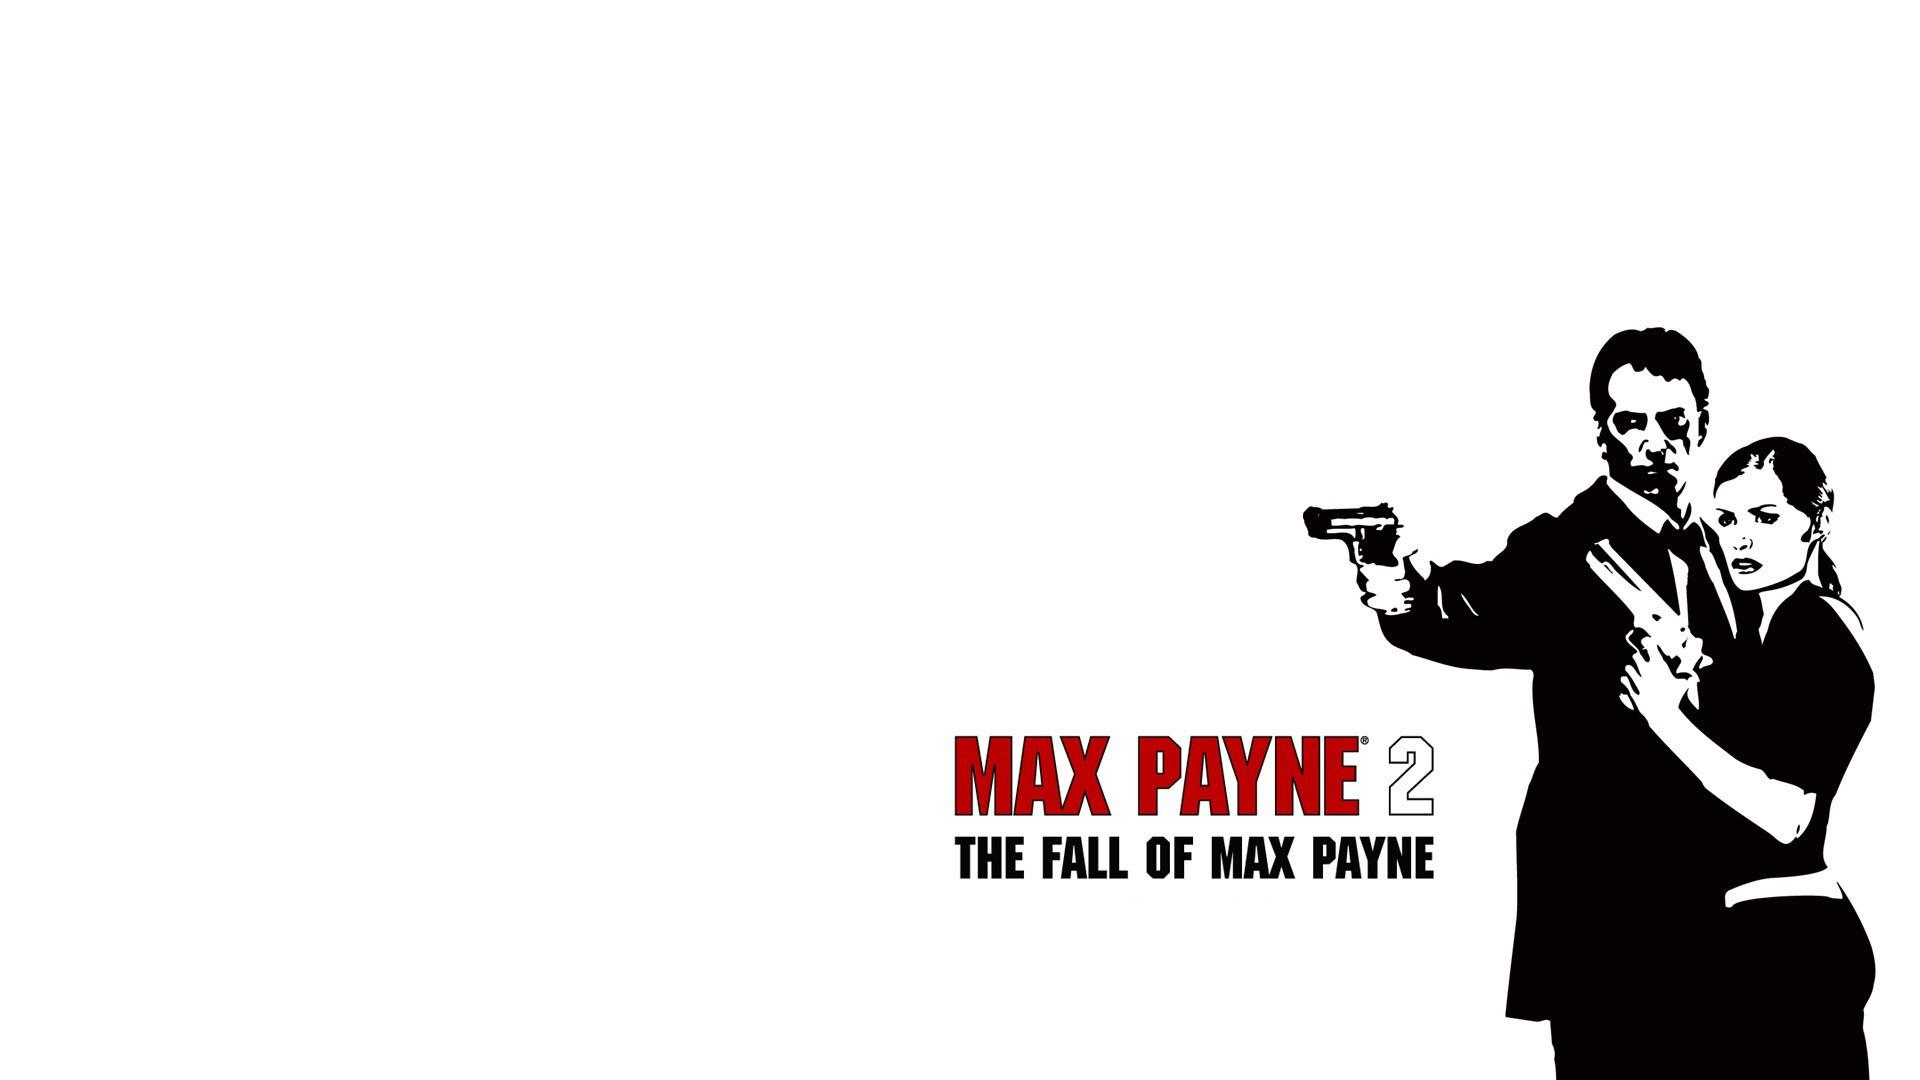 Max Payne 2 Wallpaper background picture